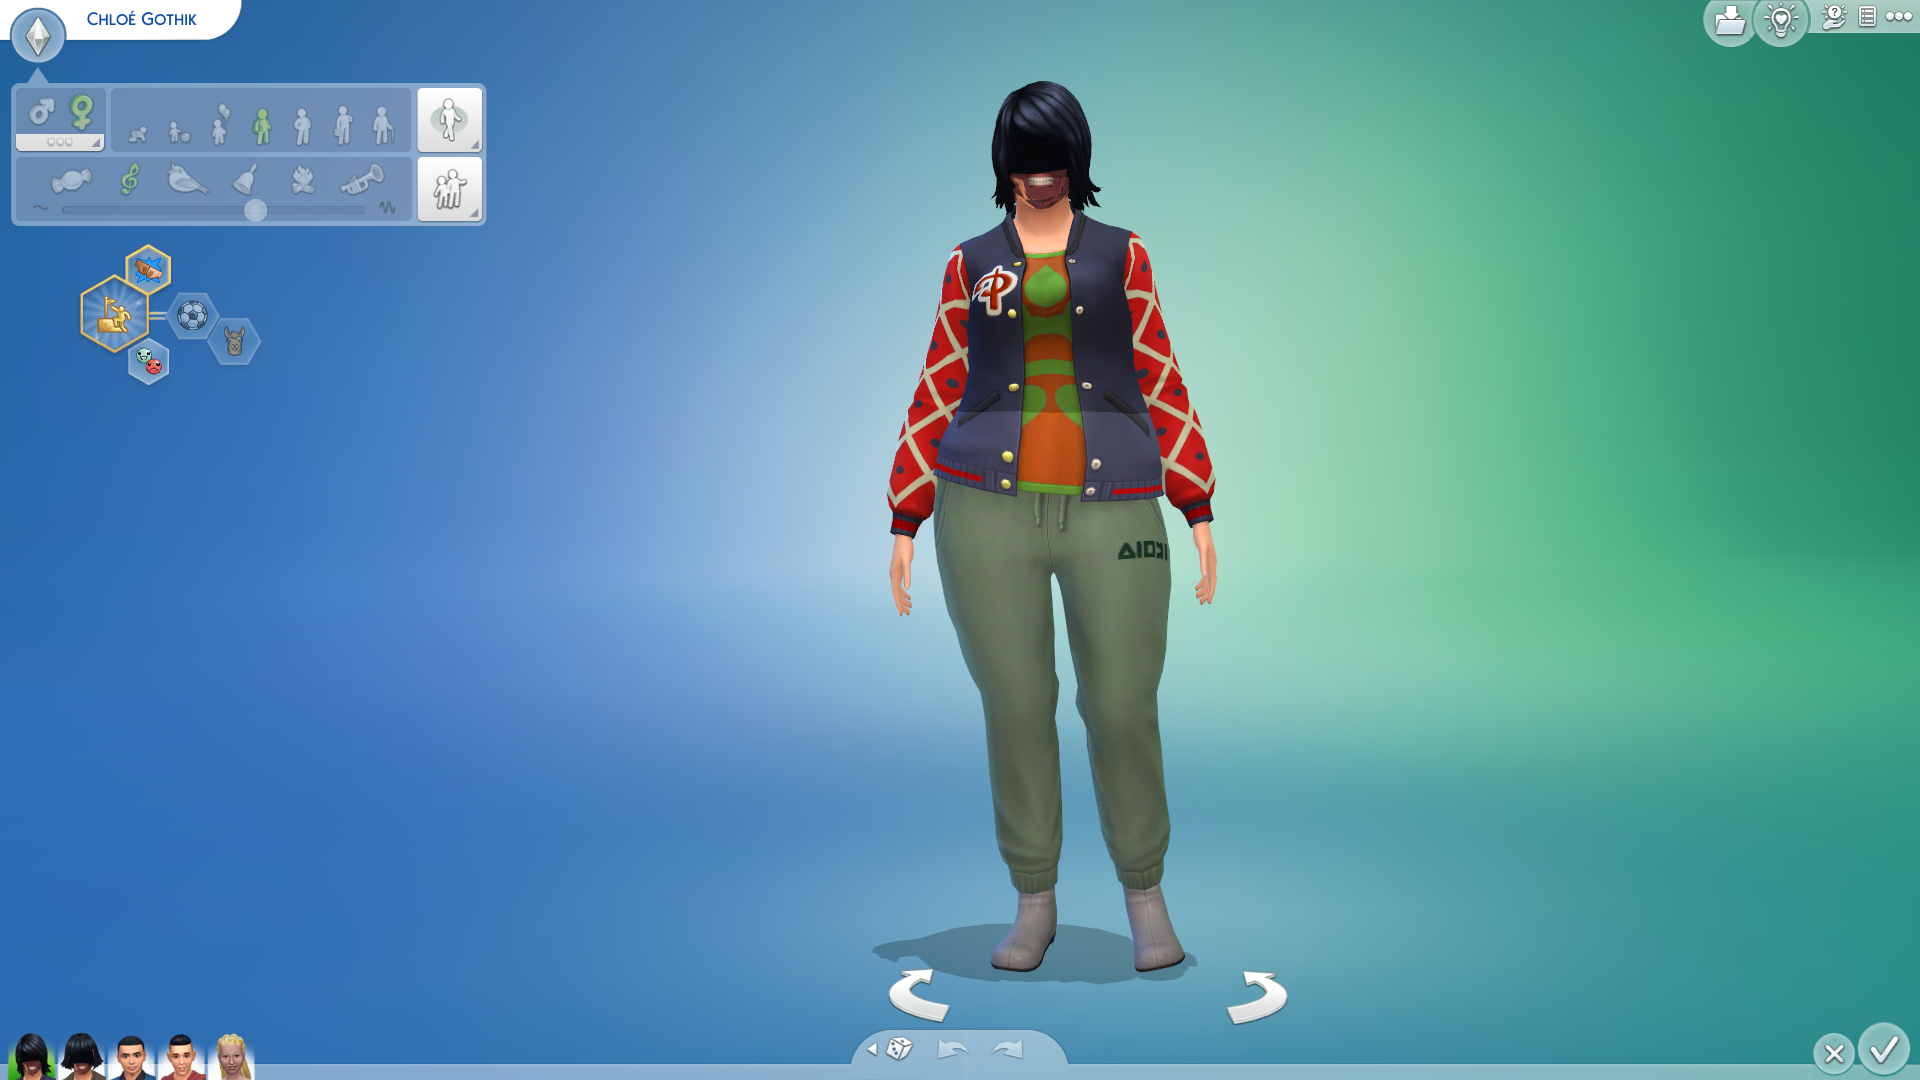 Mod The Sims - Sims 4 Mod/CC Manager 2021 by GameTimeDev [BETA] V1.1.0